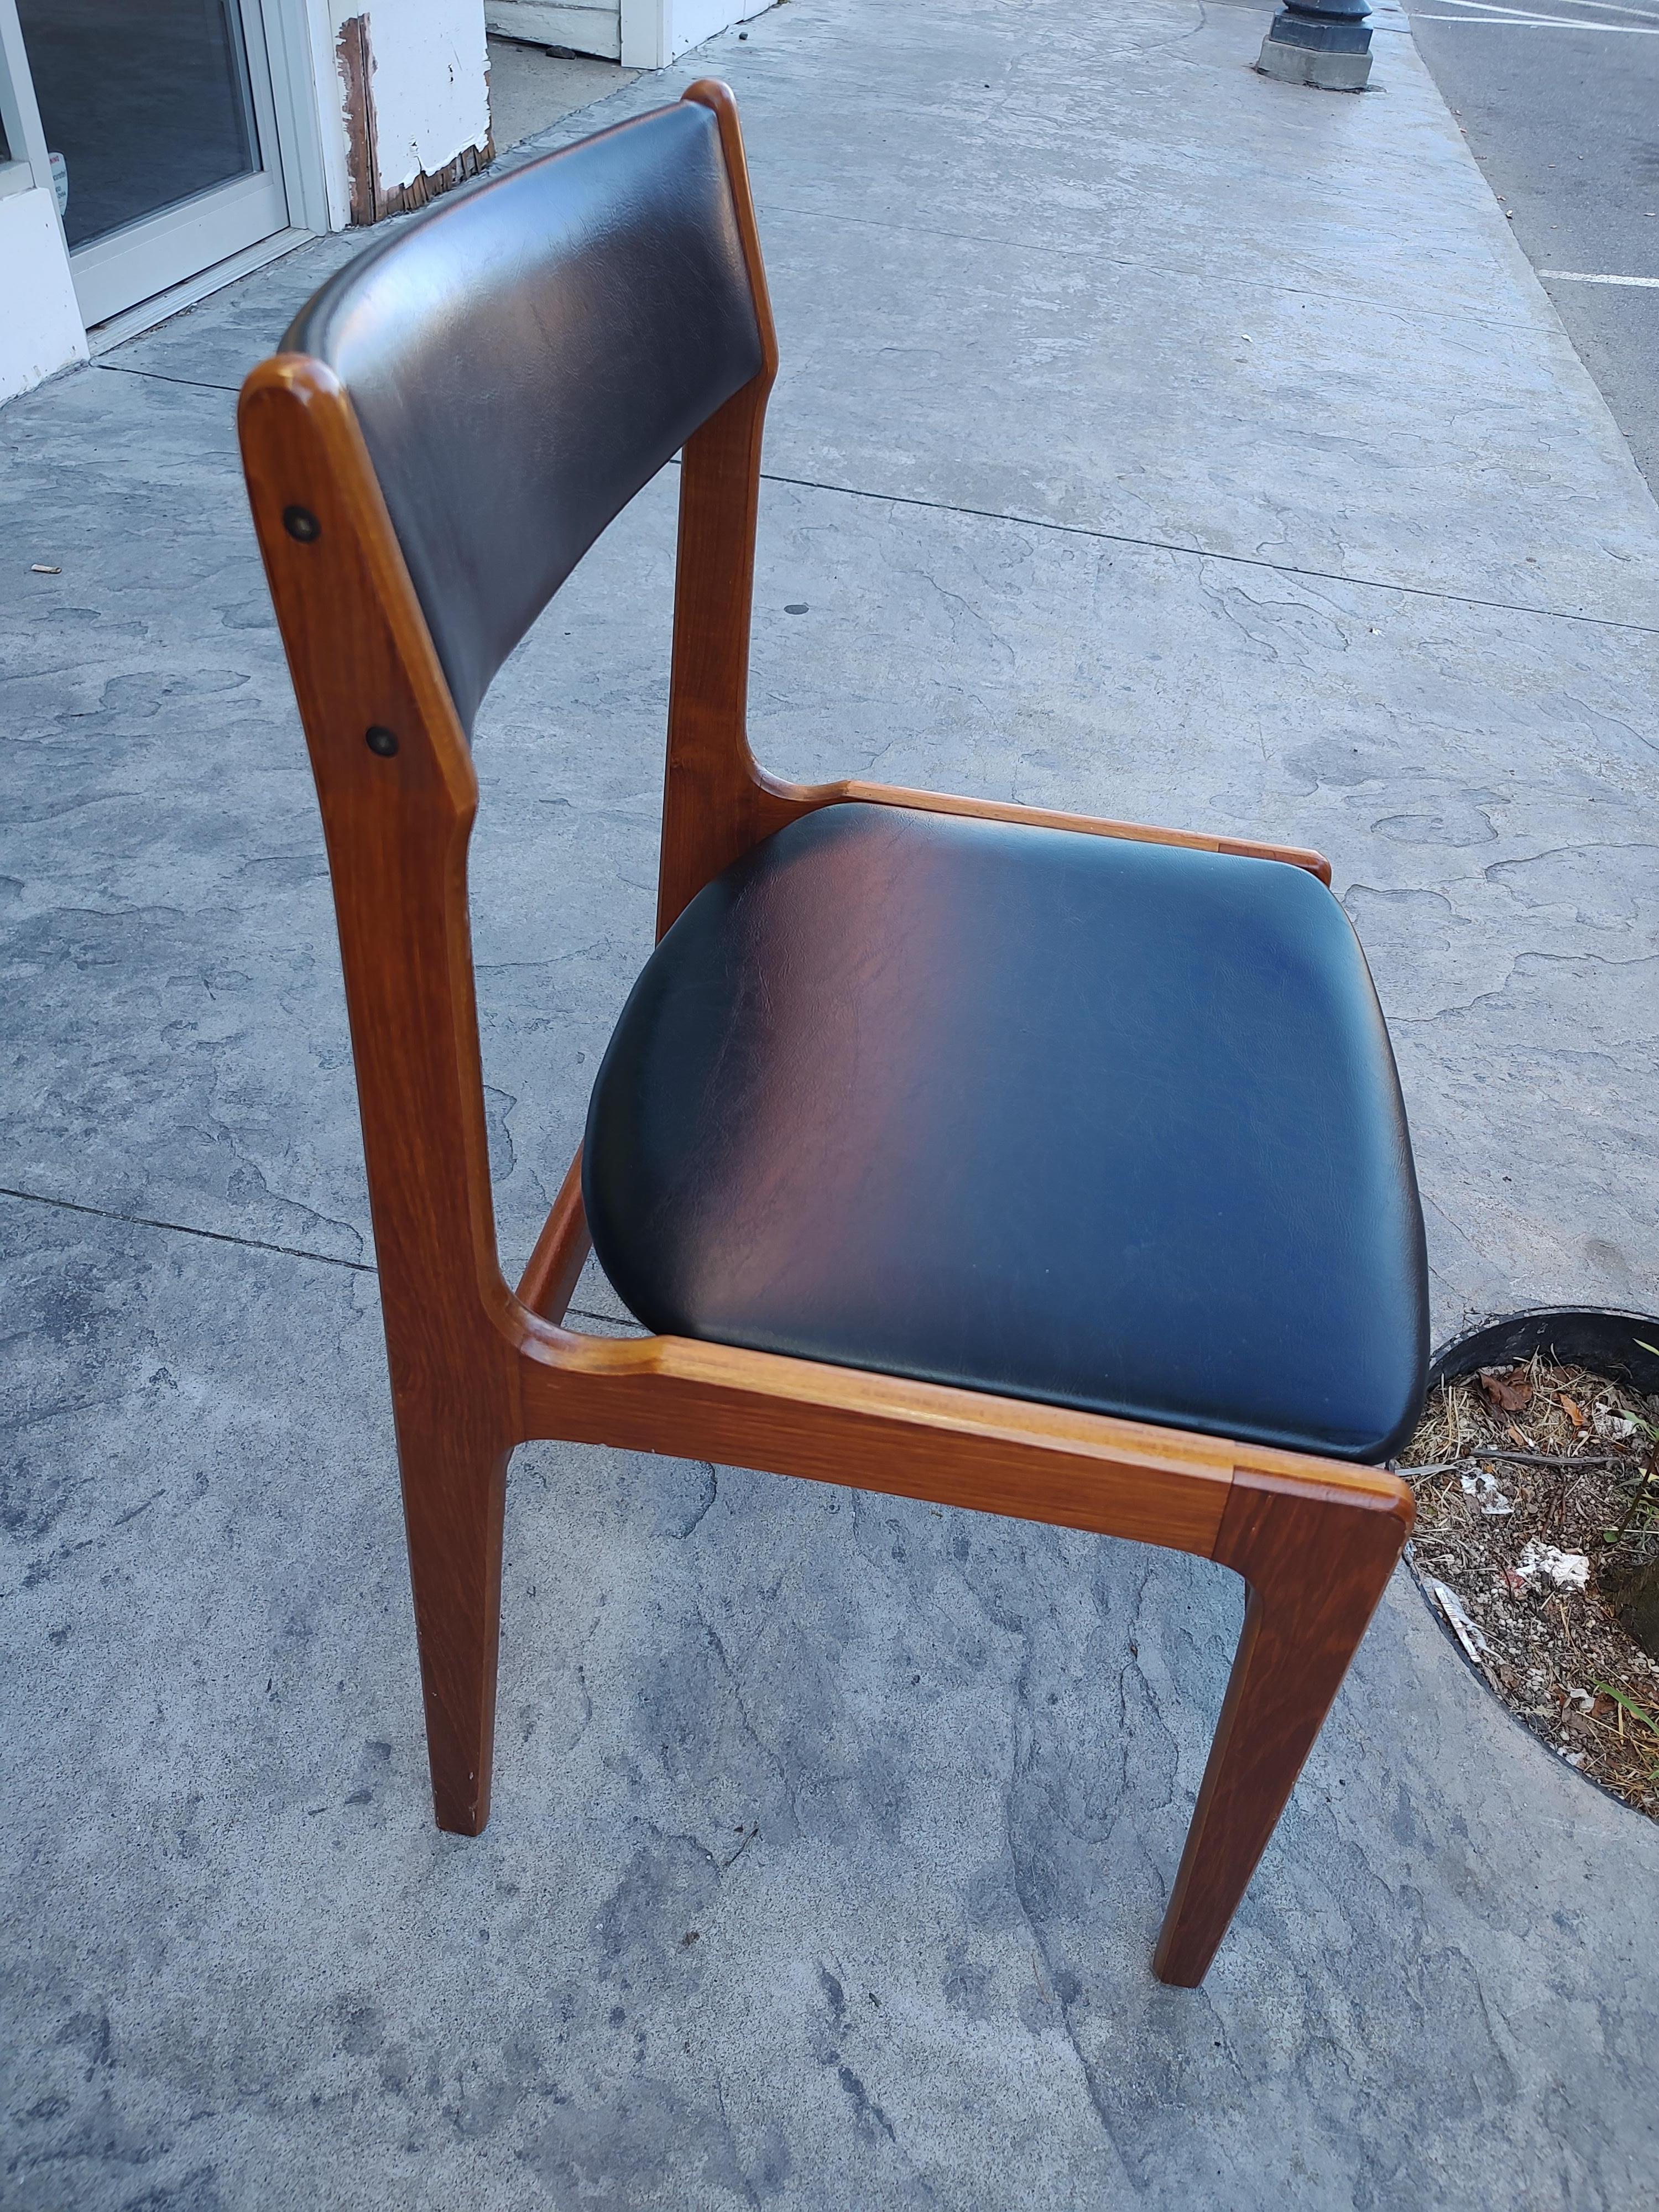 Fabulous set of 10 teak dining chairs with Leather seats and backs by Erik Buch. All in excellent vintage condition with minimal wear. Ship lap construction at the joints for optimum durability. Very comfortable. In excellent vintage condition with